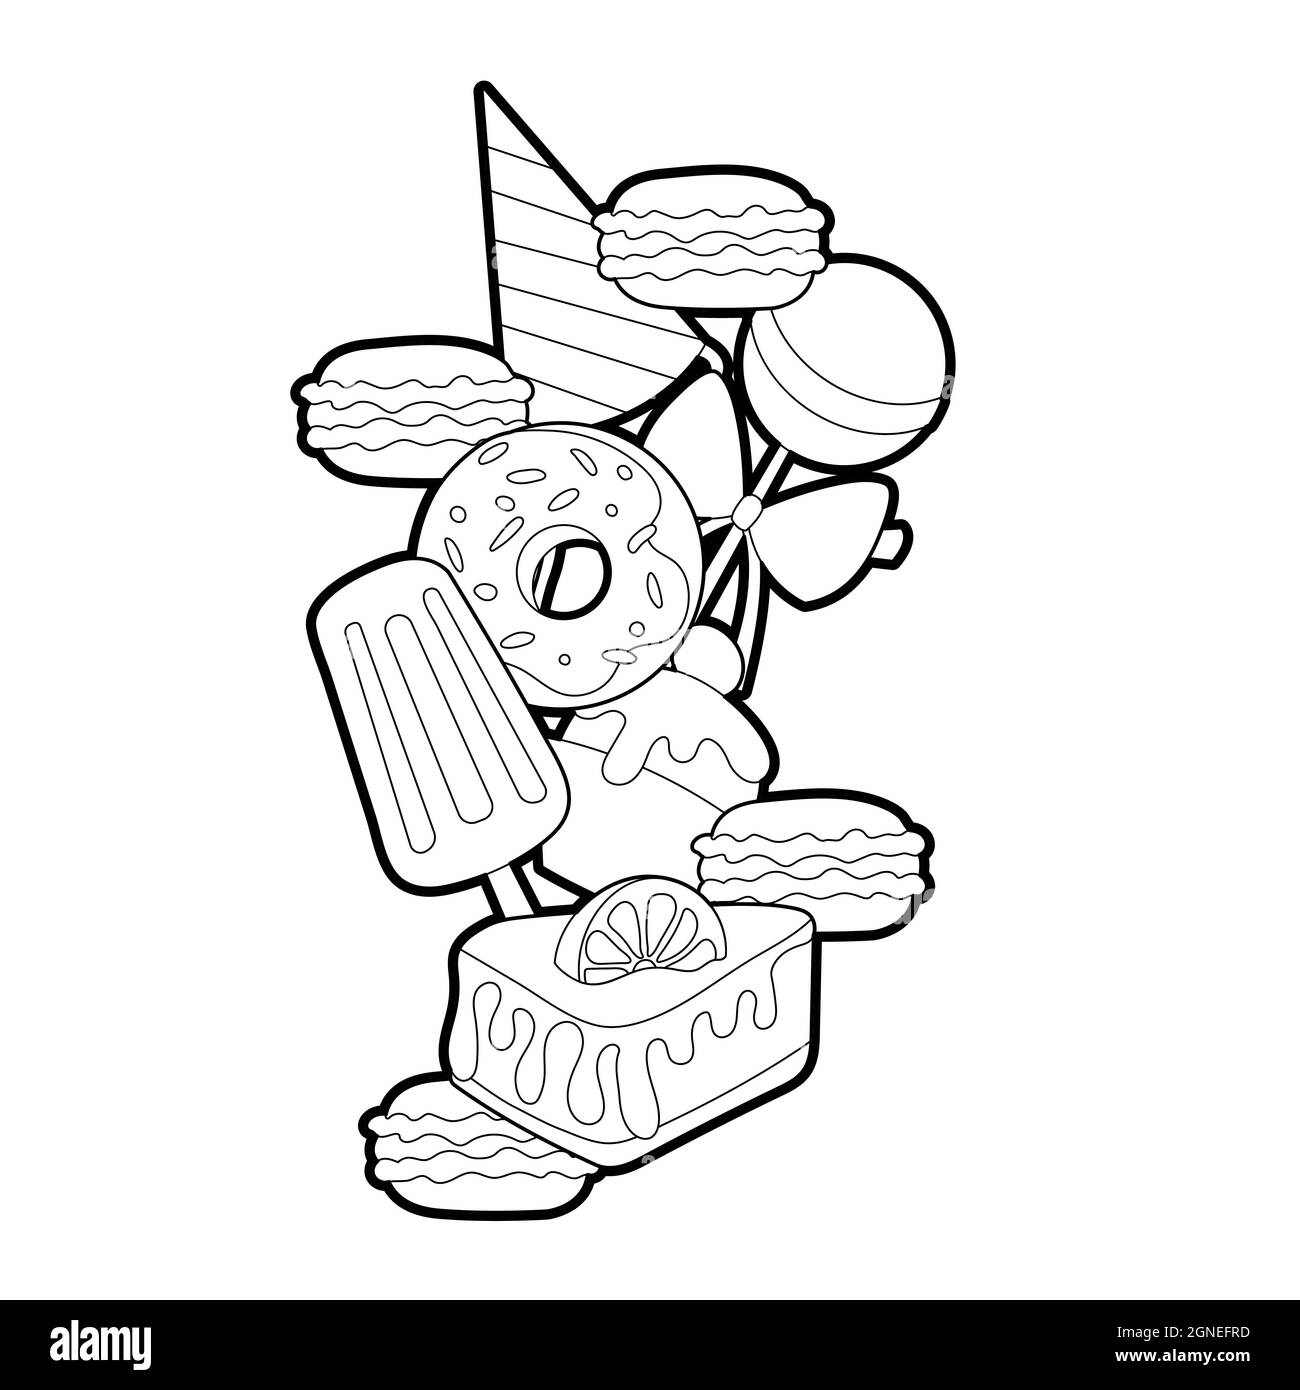 Sweets coloring page. Isolated on white background. Stock Vector